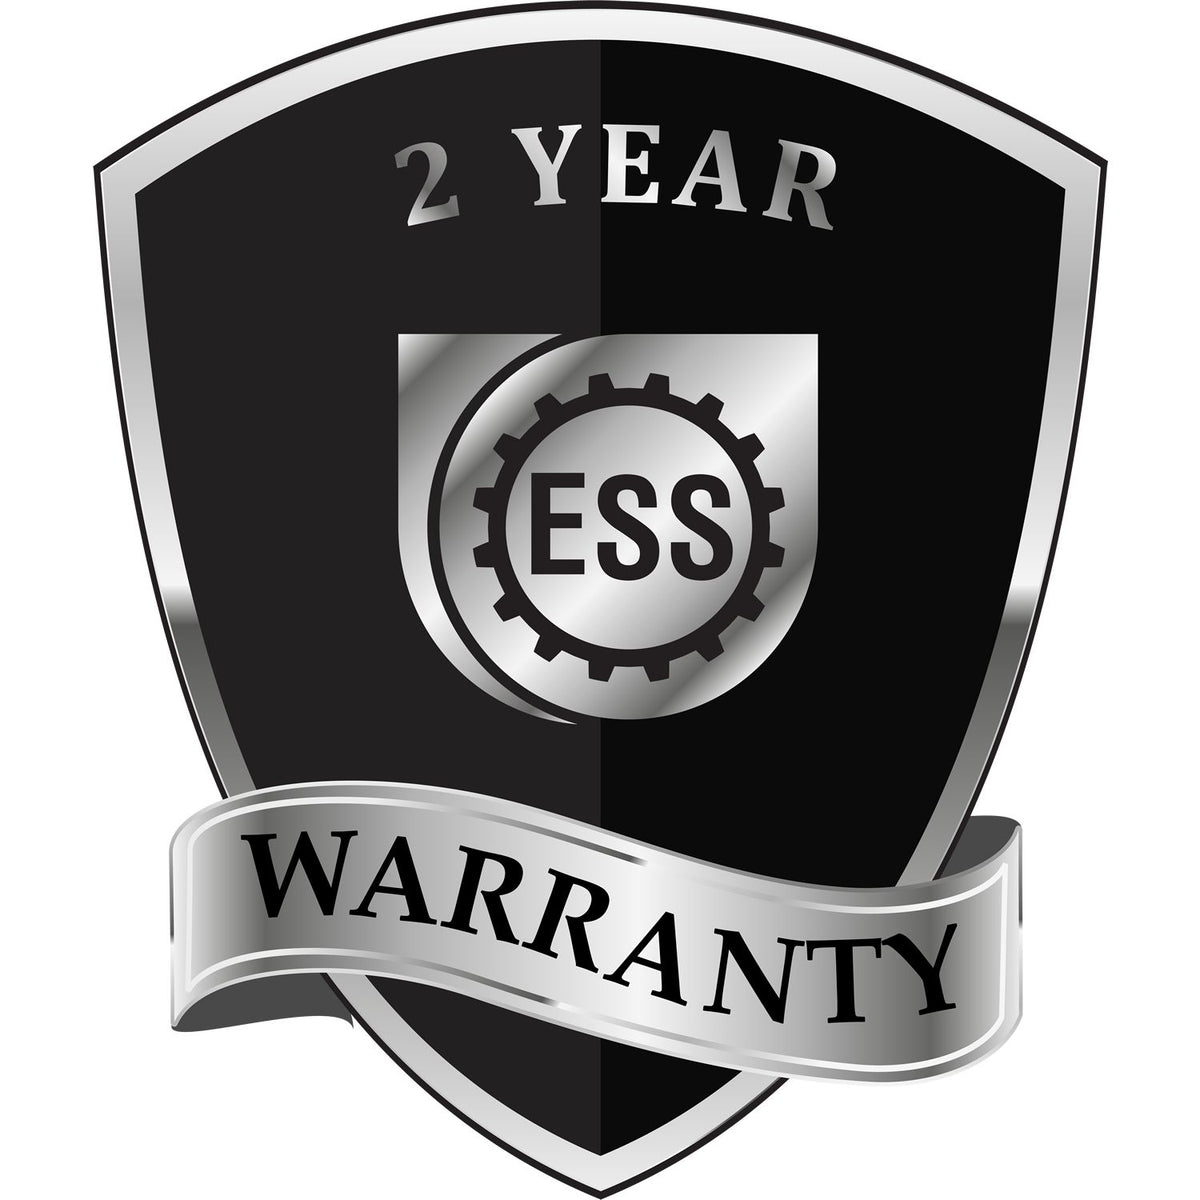 A badge or emblem showing a warranty icon for the Extended Long Reach Arizona Surveyor Embosser